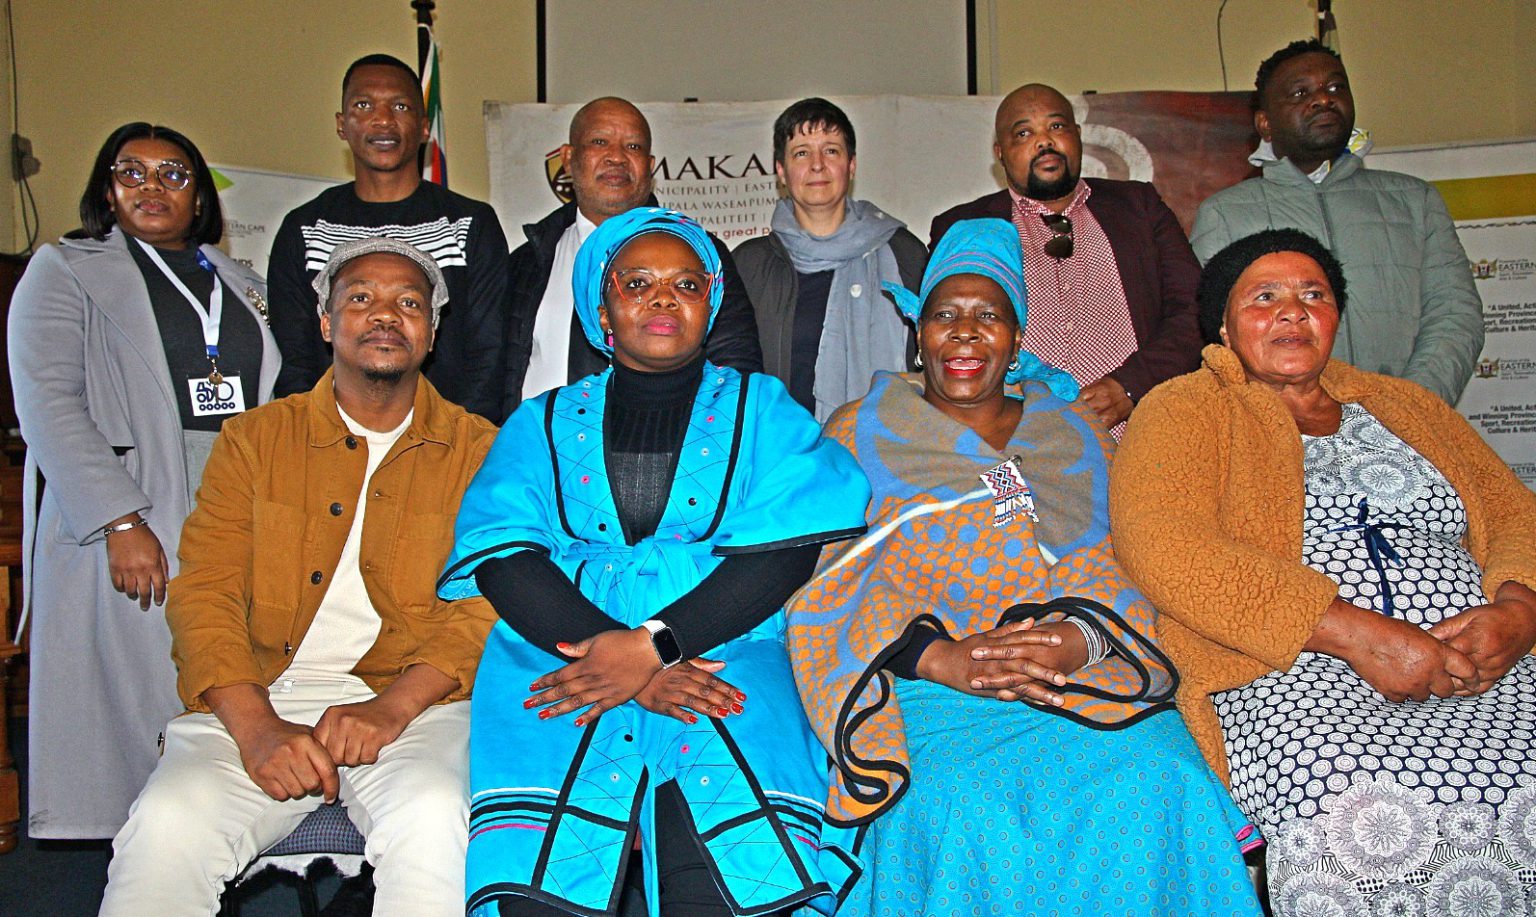 Various stakeholders including Eastern Cape Member of the Legislature Nonceba Kontsiwe, Makana mayor Yandiswa Vara and National Arts Festival CEO Monica Newtown at a press briefing on the municipality's state of readiness to host the 50th National Arts Festival that got underway on 20 June and will continue until 30 June. Photo: Steven Lang